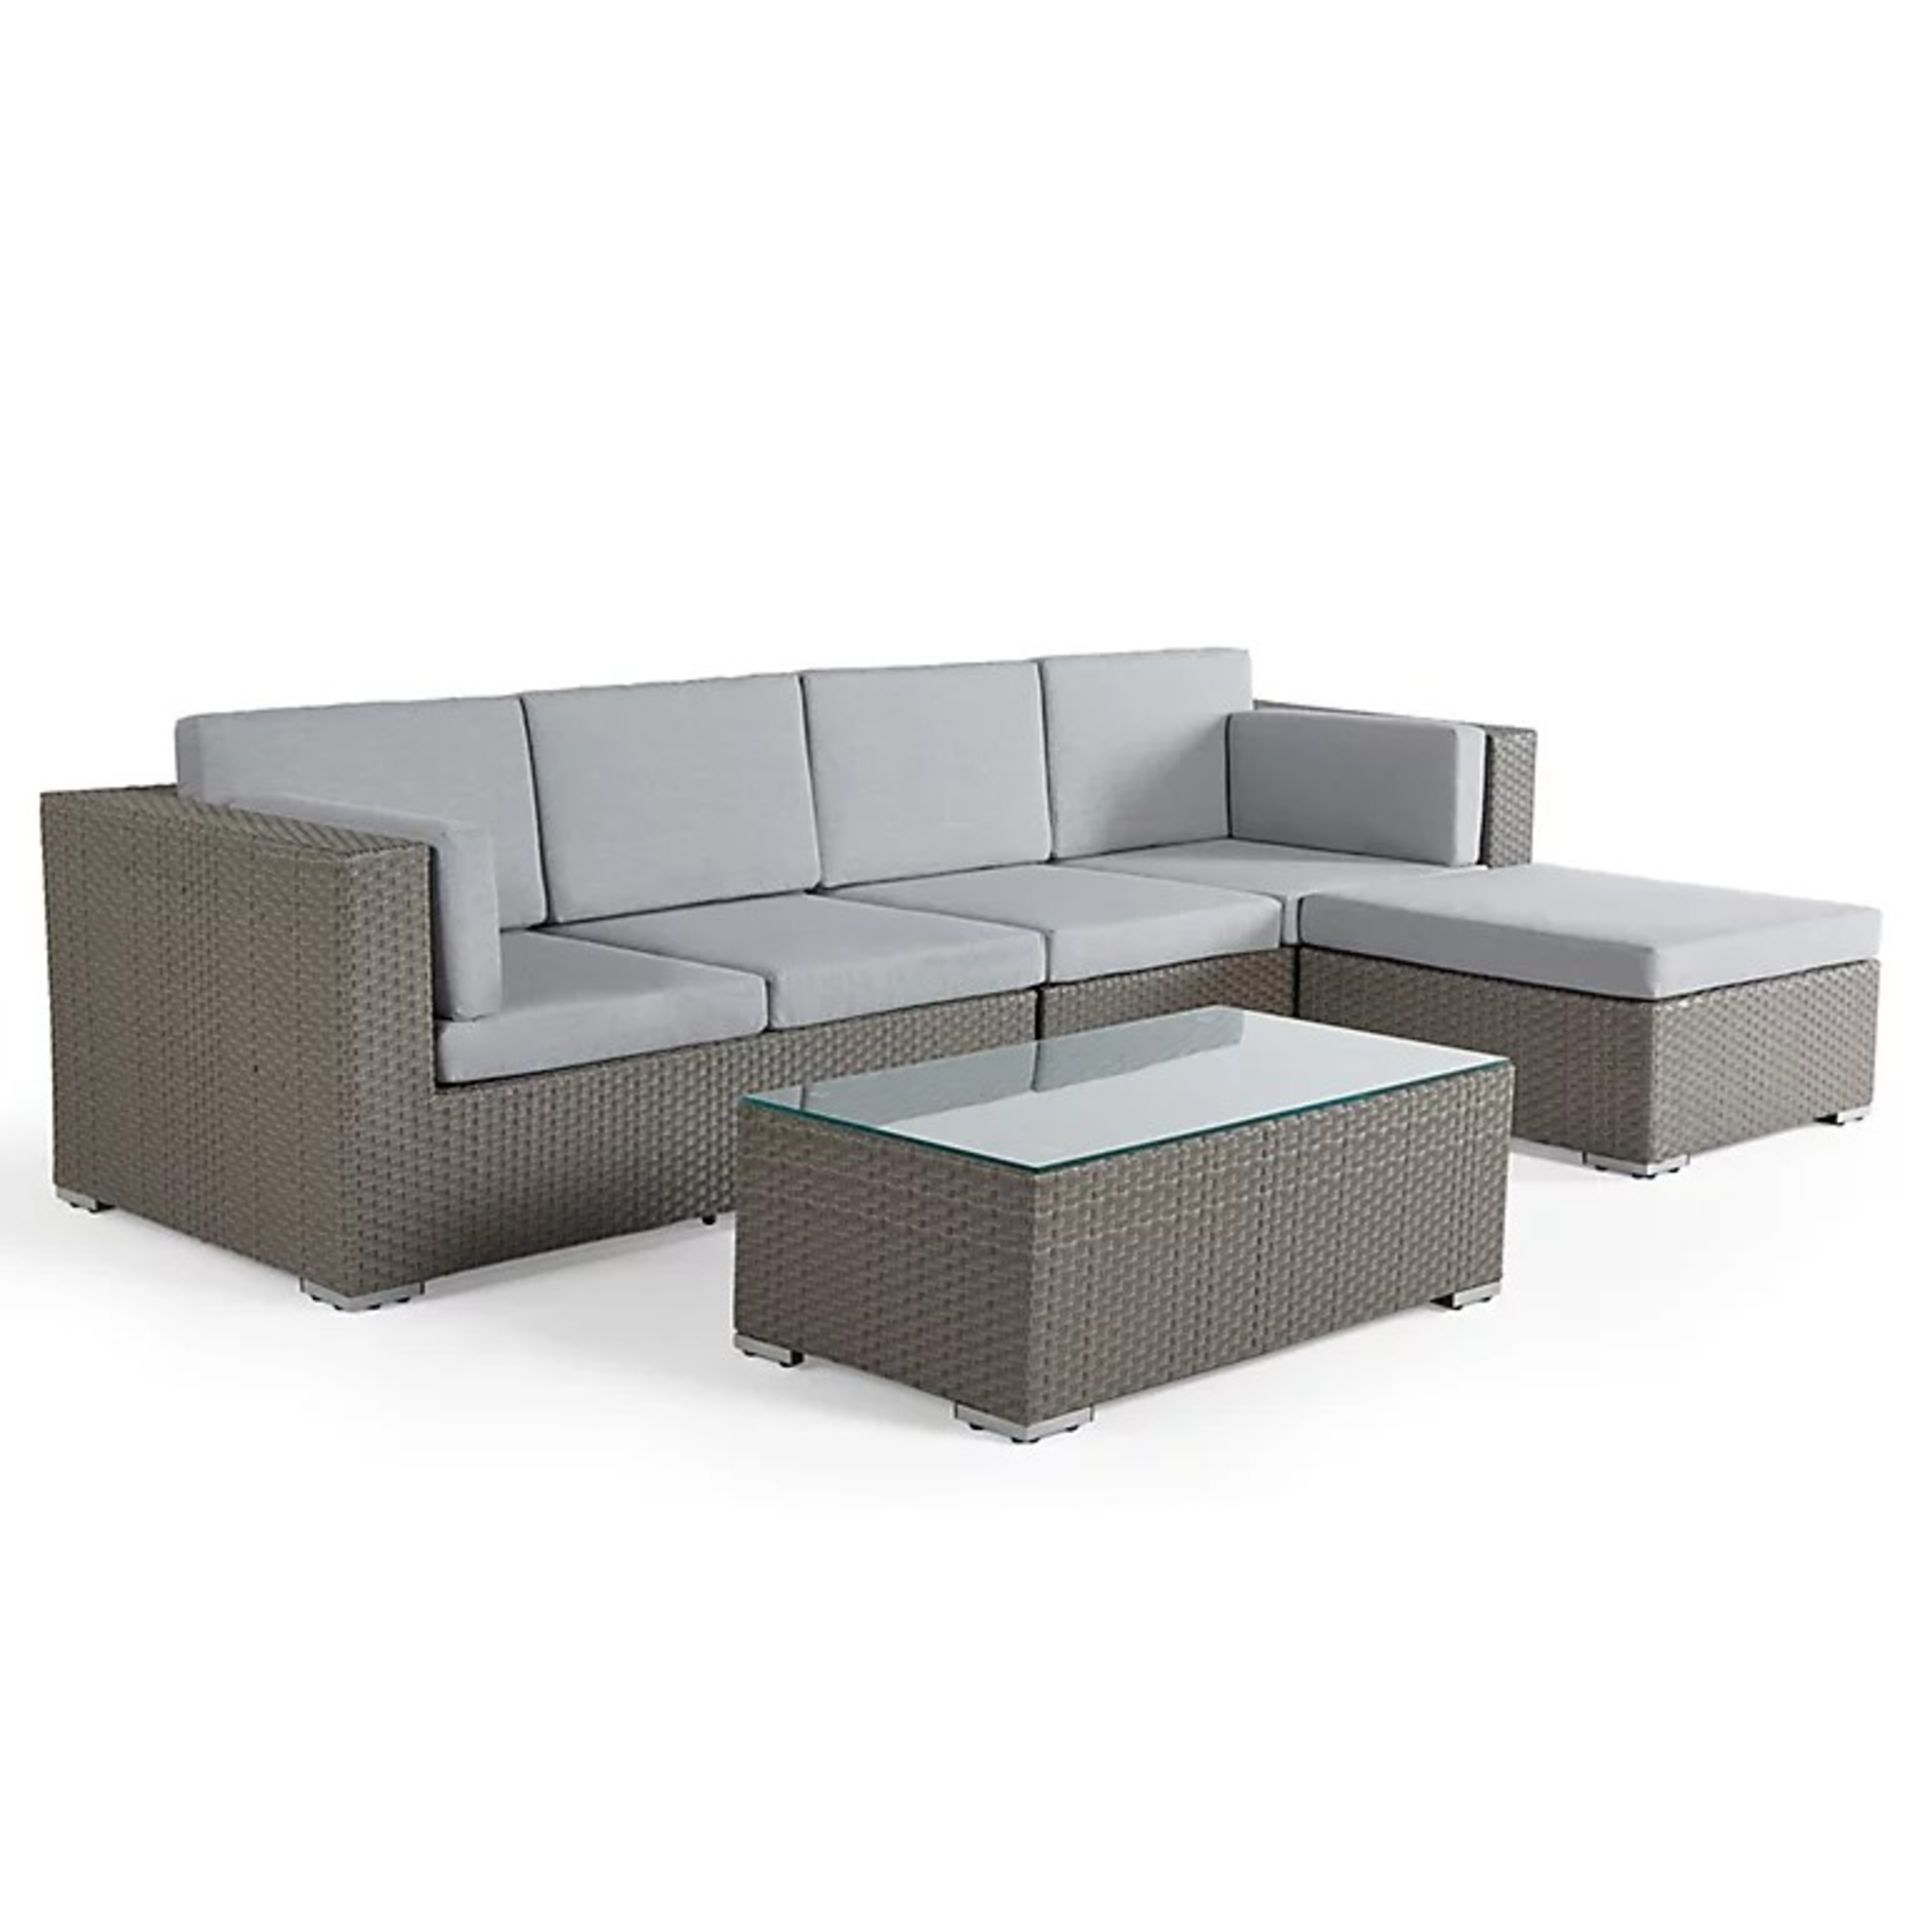 Amalfi Rattan 4 Seater Sofa & Footstool *Only Contains 1/3 + 2/3 Boxes* - ER32